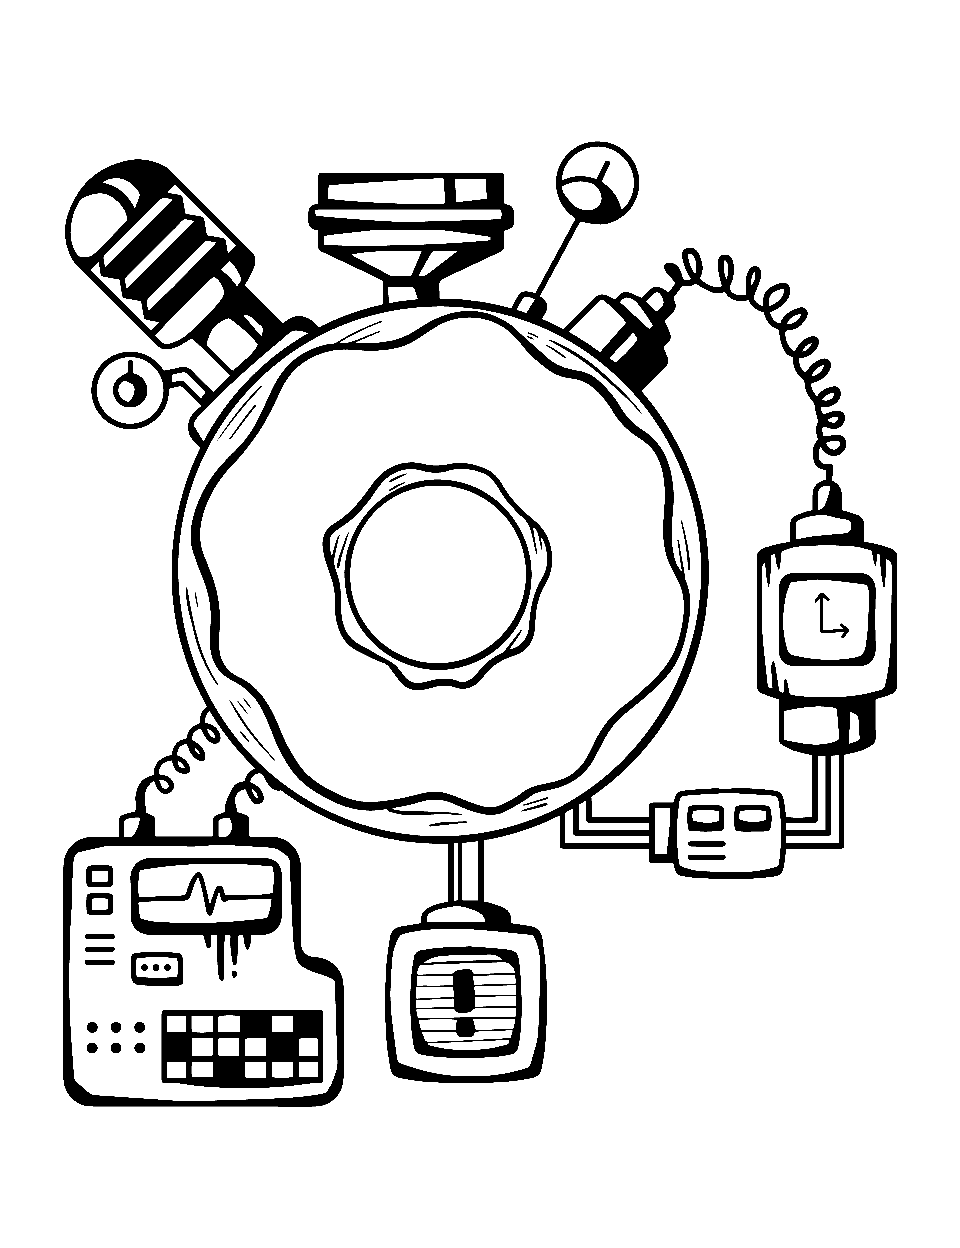 Donut Time Machine Coloring Page - An intricate time machine that runs on donuts.